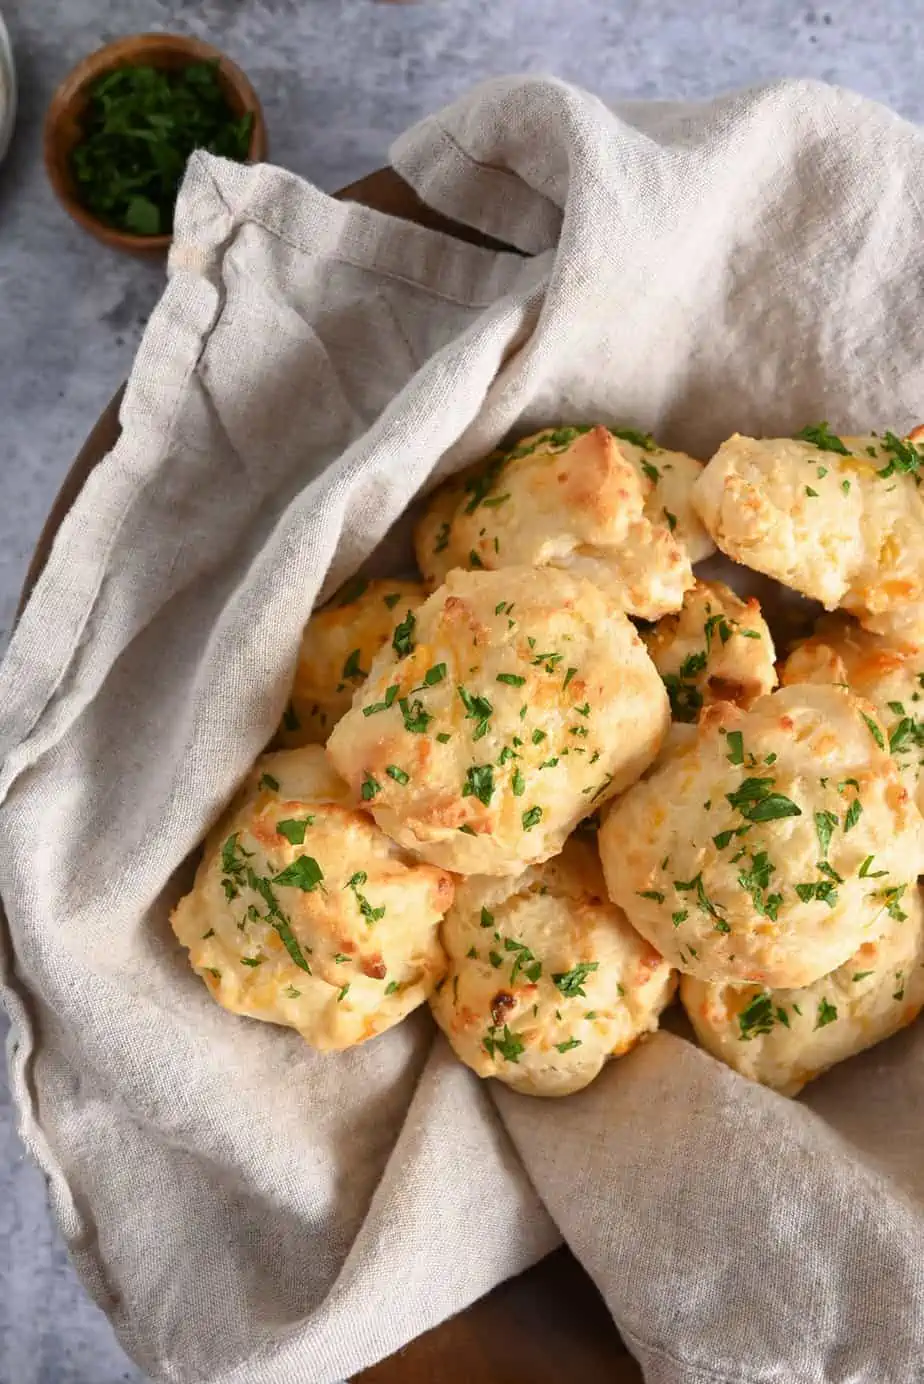 https://www.stephiecooks.com/wp-content/uploads/2013/06/red-lobster-biscuits-in-basket.webp